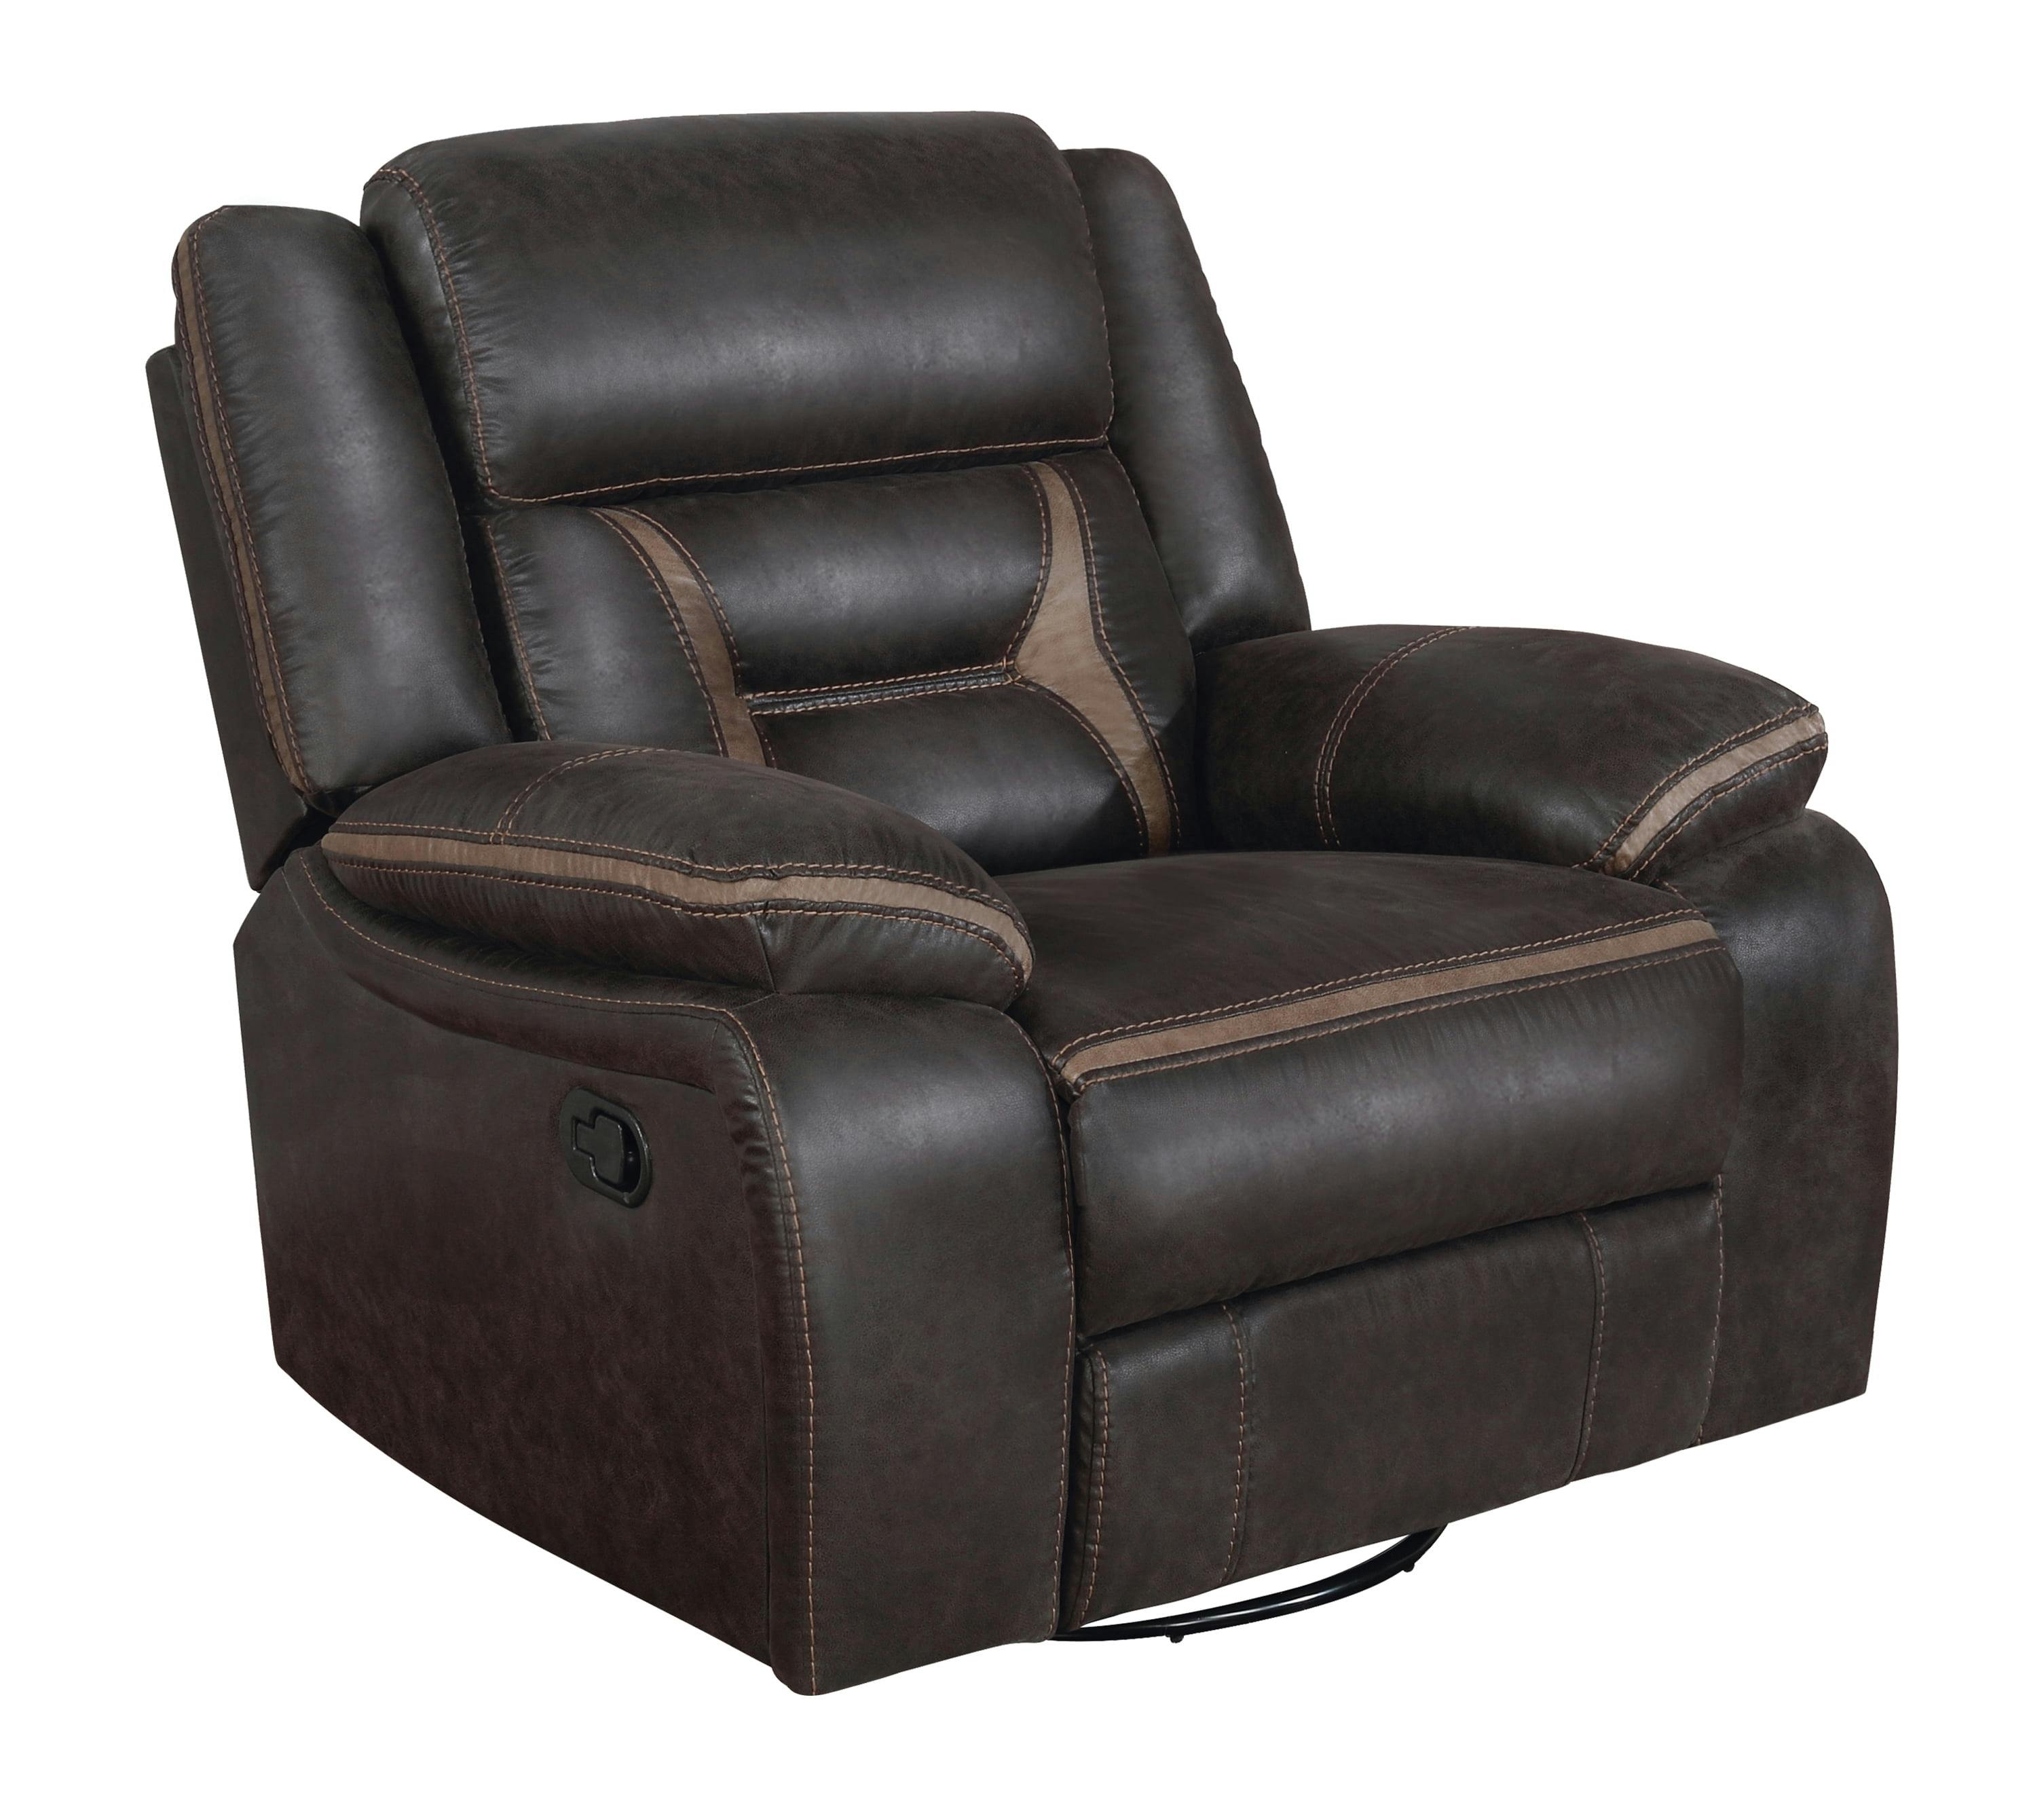 Transitional Brown Faux Leather Swivel Recliner with Lift